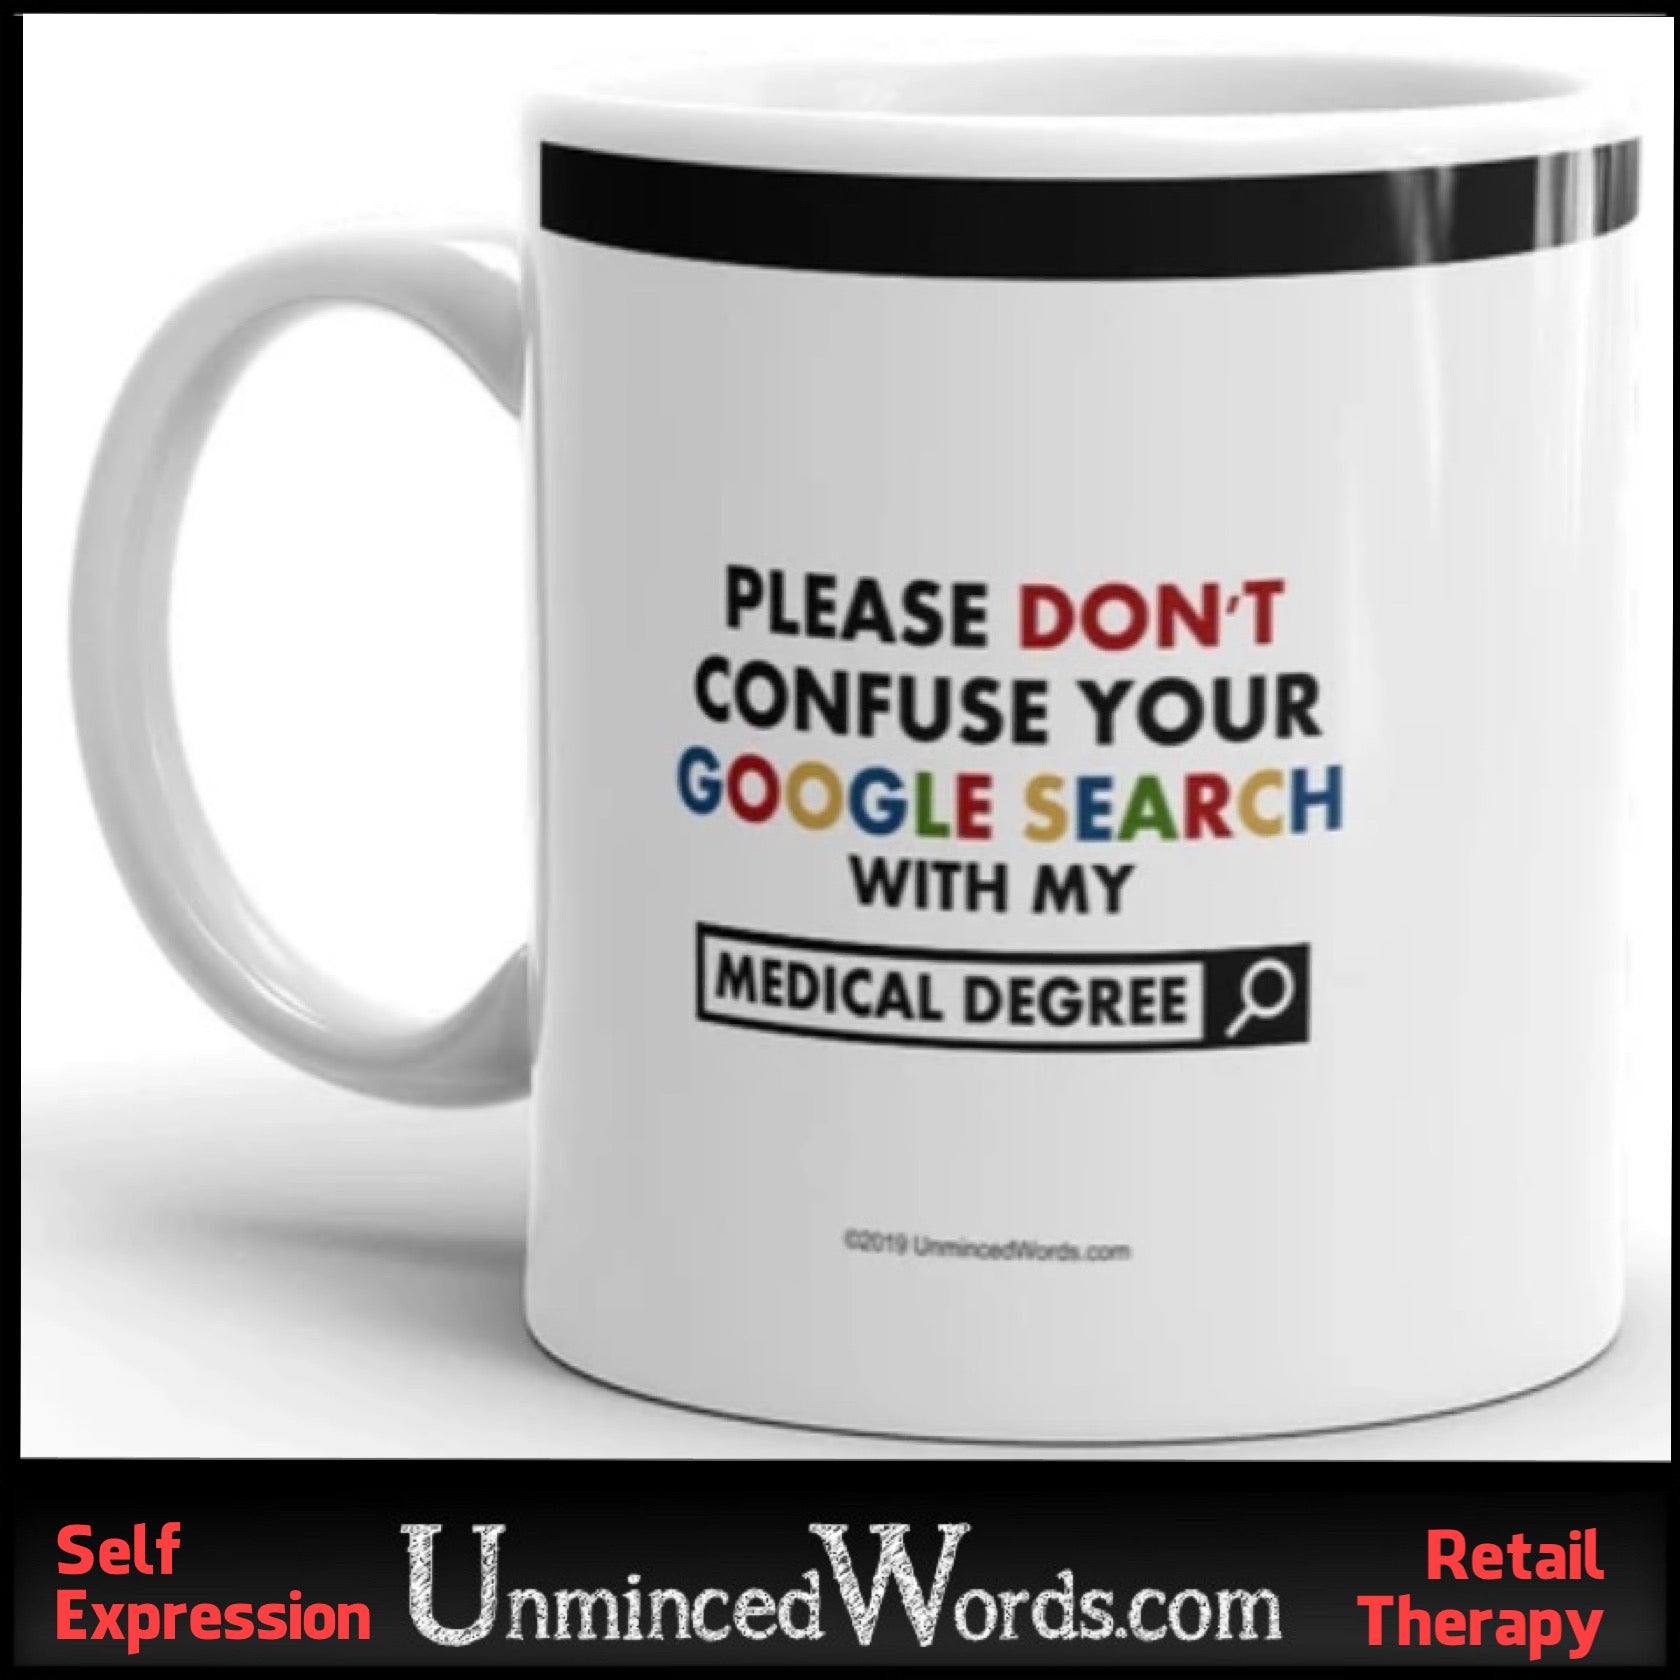 Please don’t confuse your Google search with my medical degree